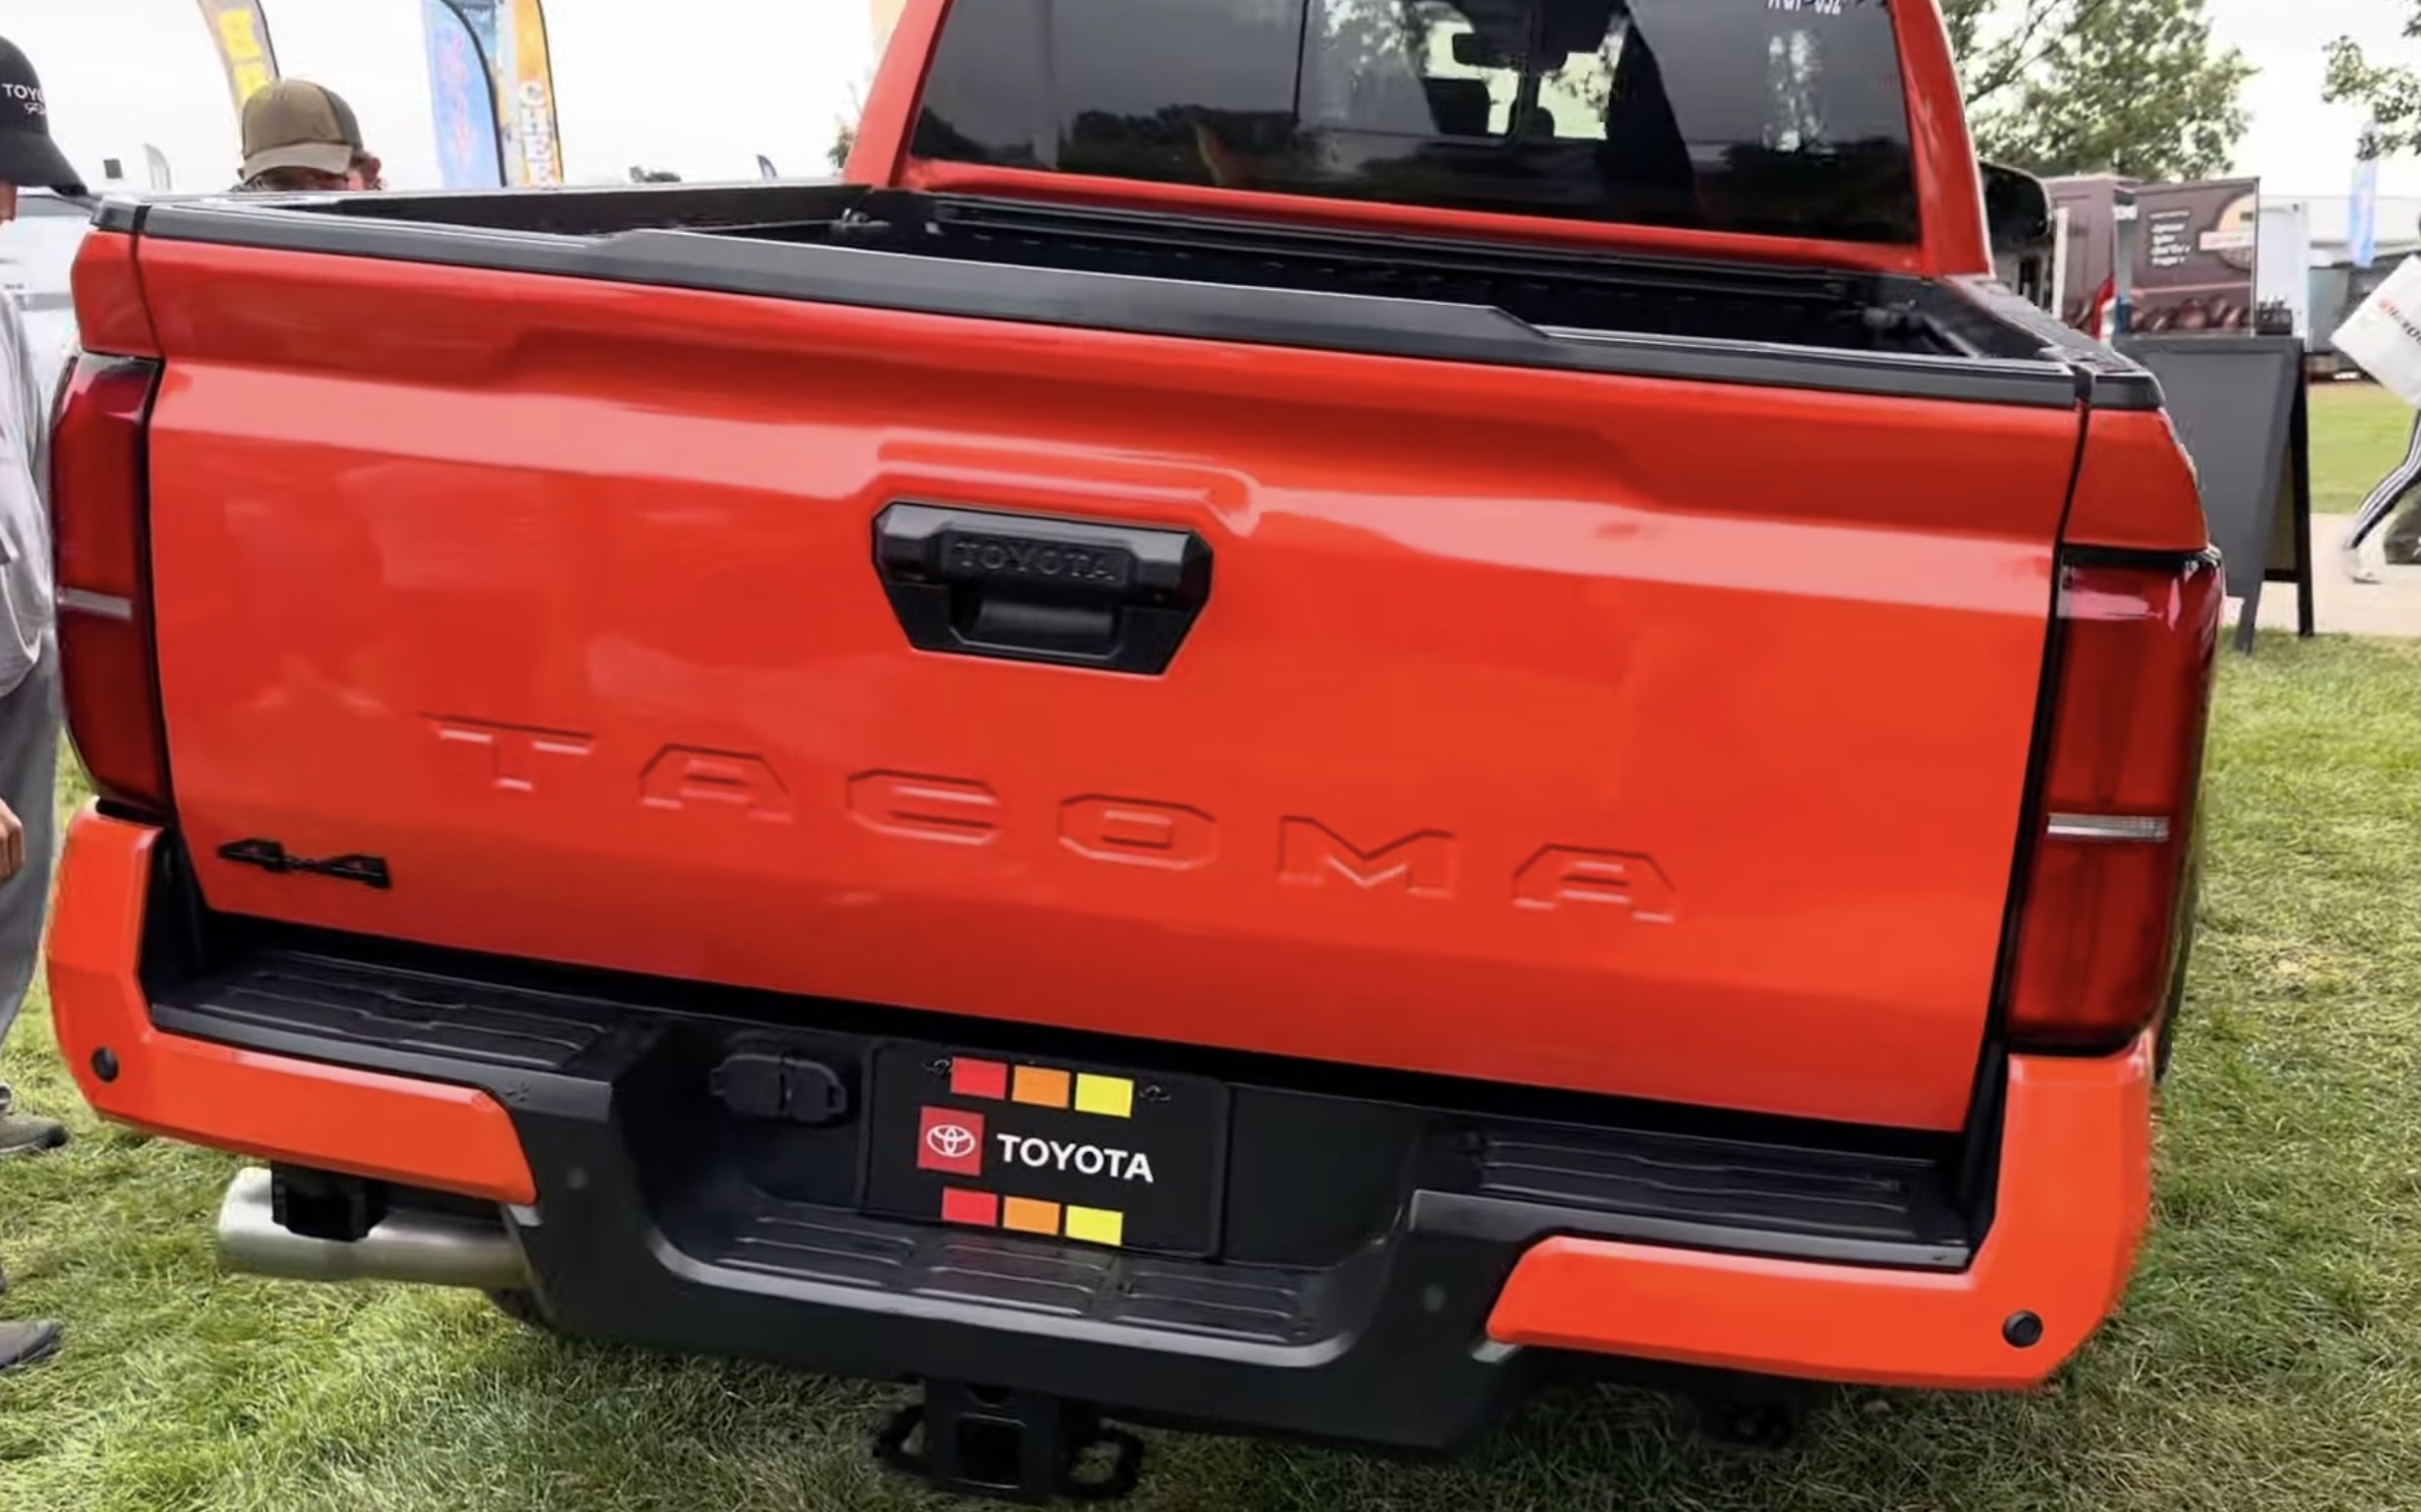 2024 Tacoma 2024 Tacoma TRD Off-Road has first official public reveal @ Overland Expo! [Videos + Photos] solar-octane-2024-tacoma-trd-off-road-9-